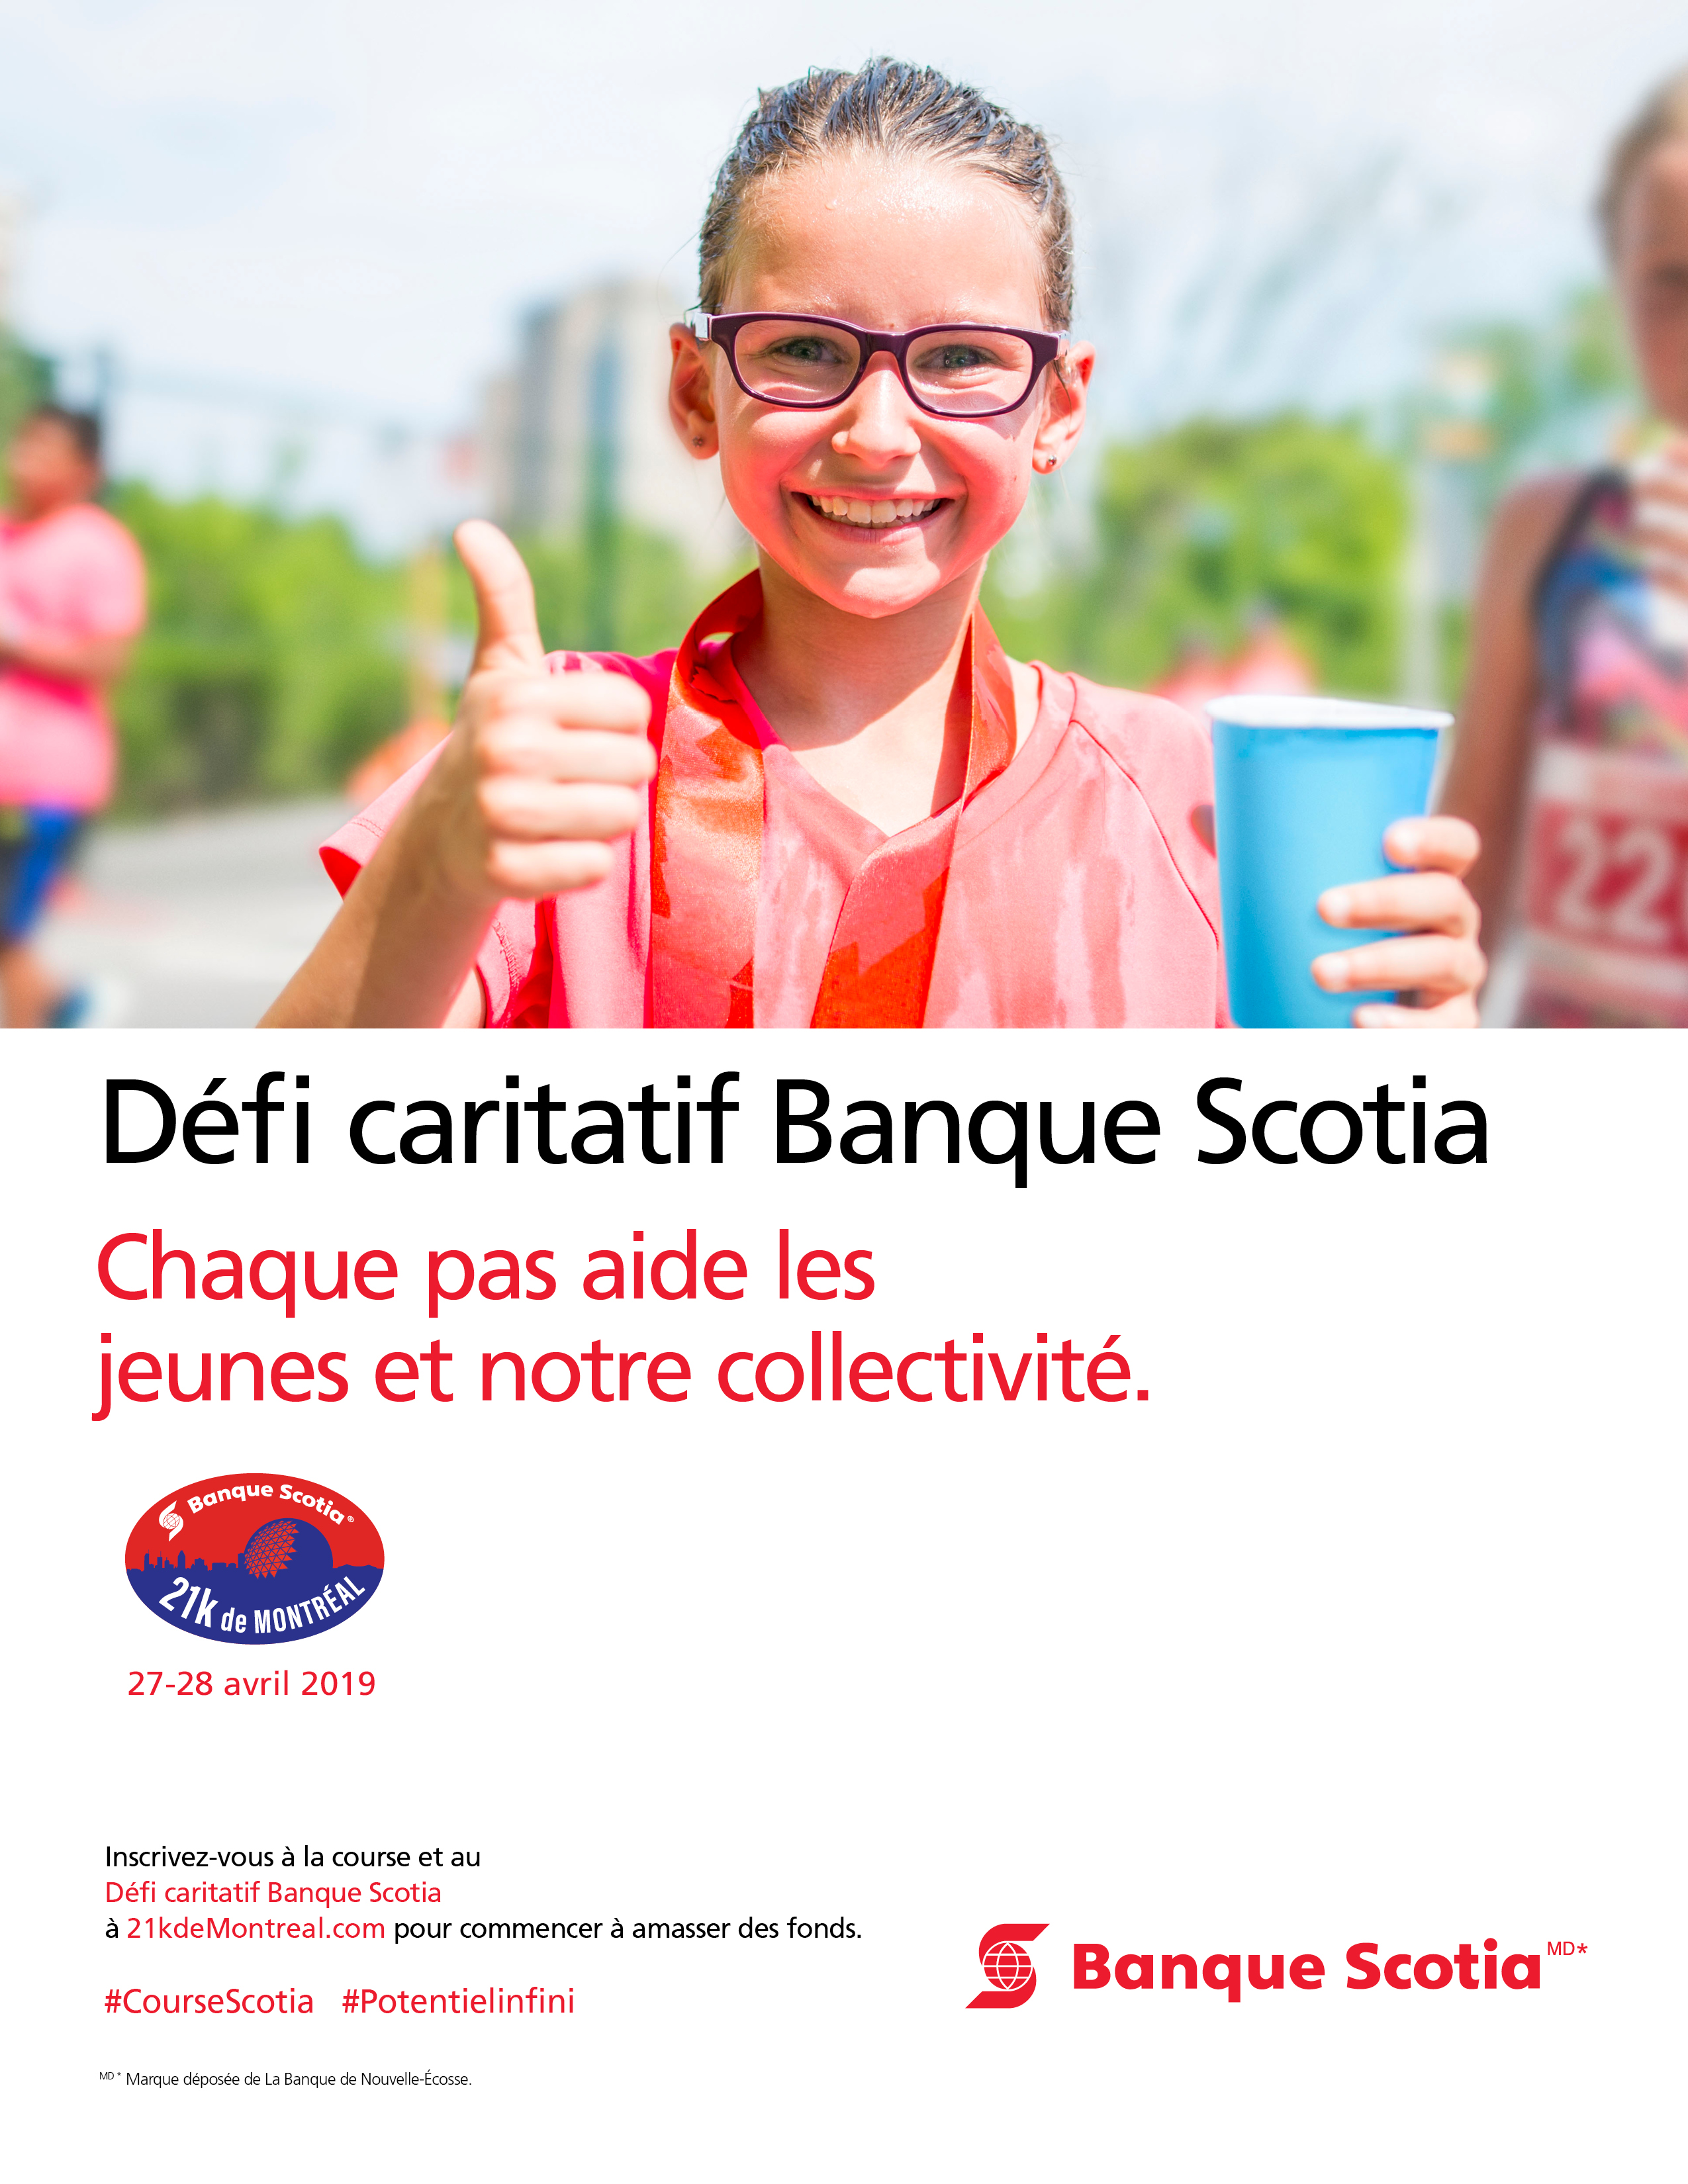 Run, walk or stroll for Theresa in the Scotiabank Charity Challenge this April!